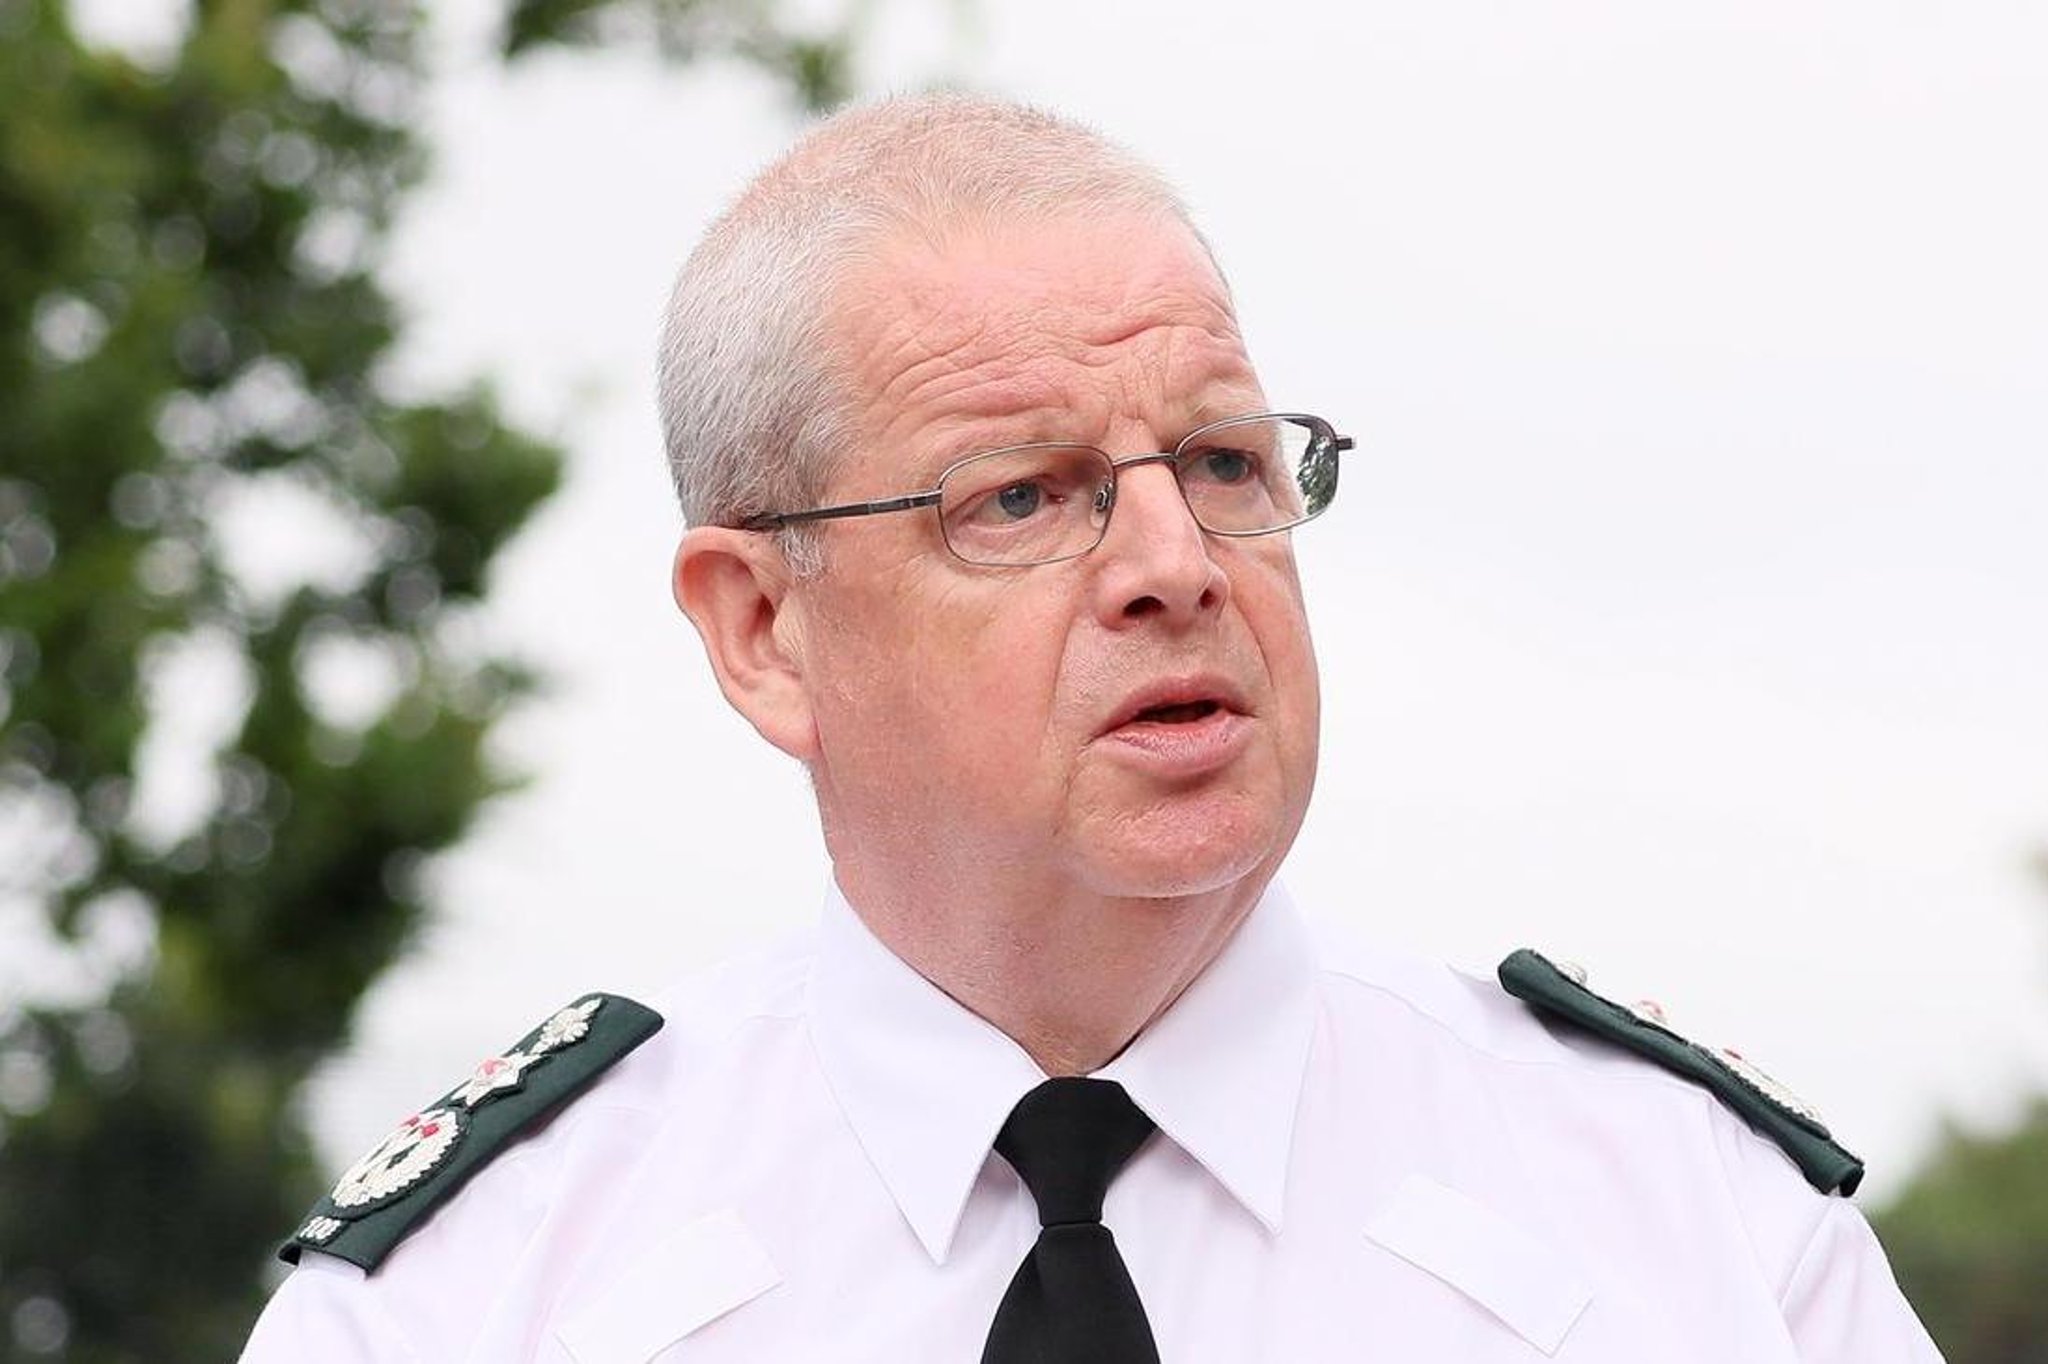 PSNI review escorts for mining explosives after £440k loss